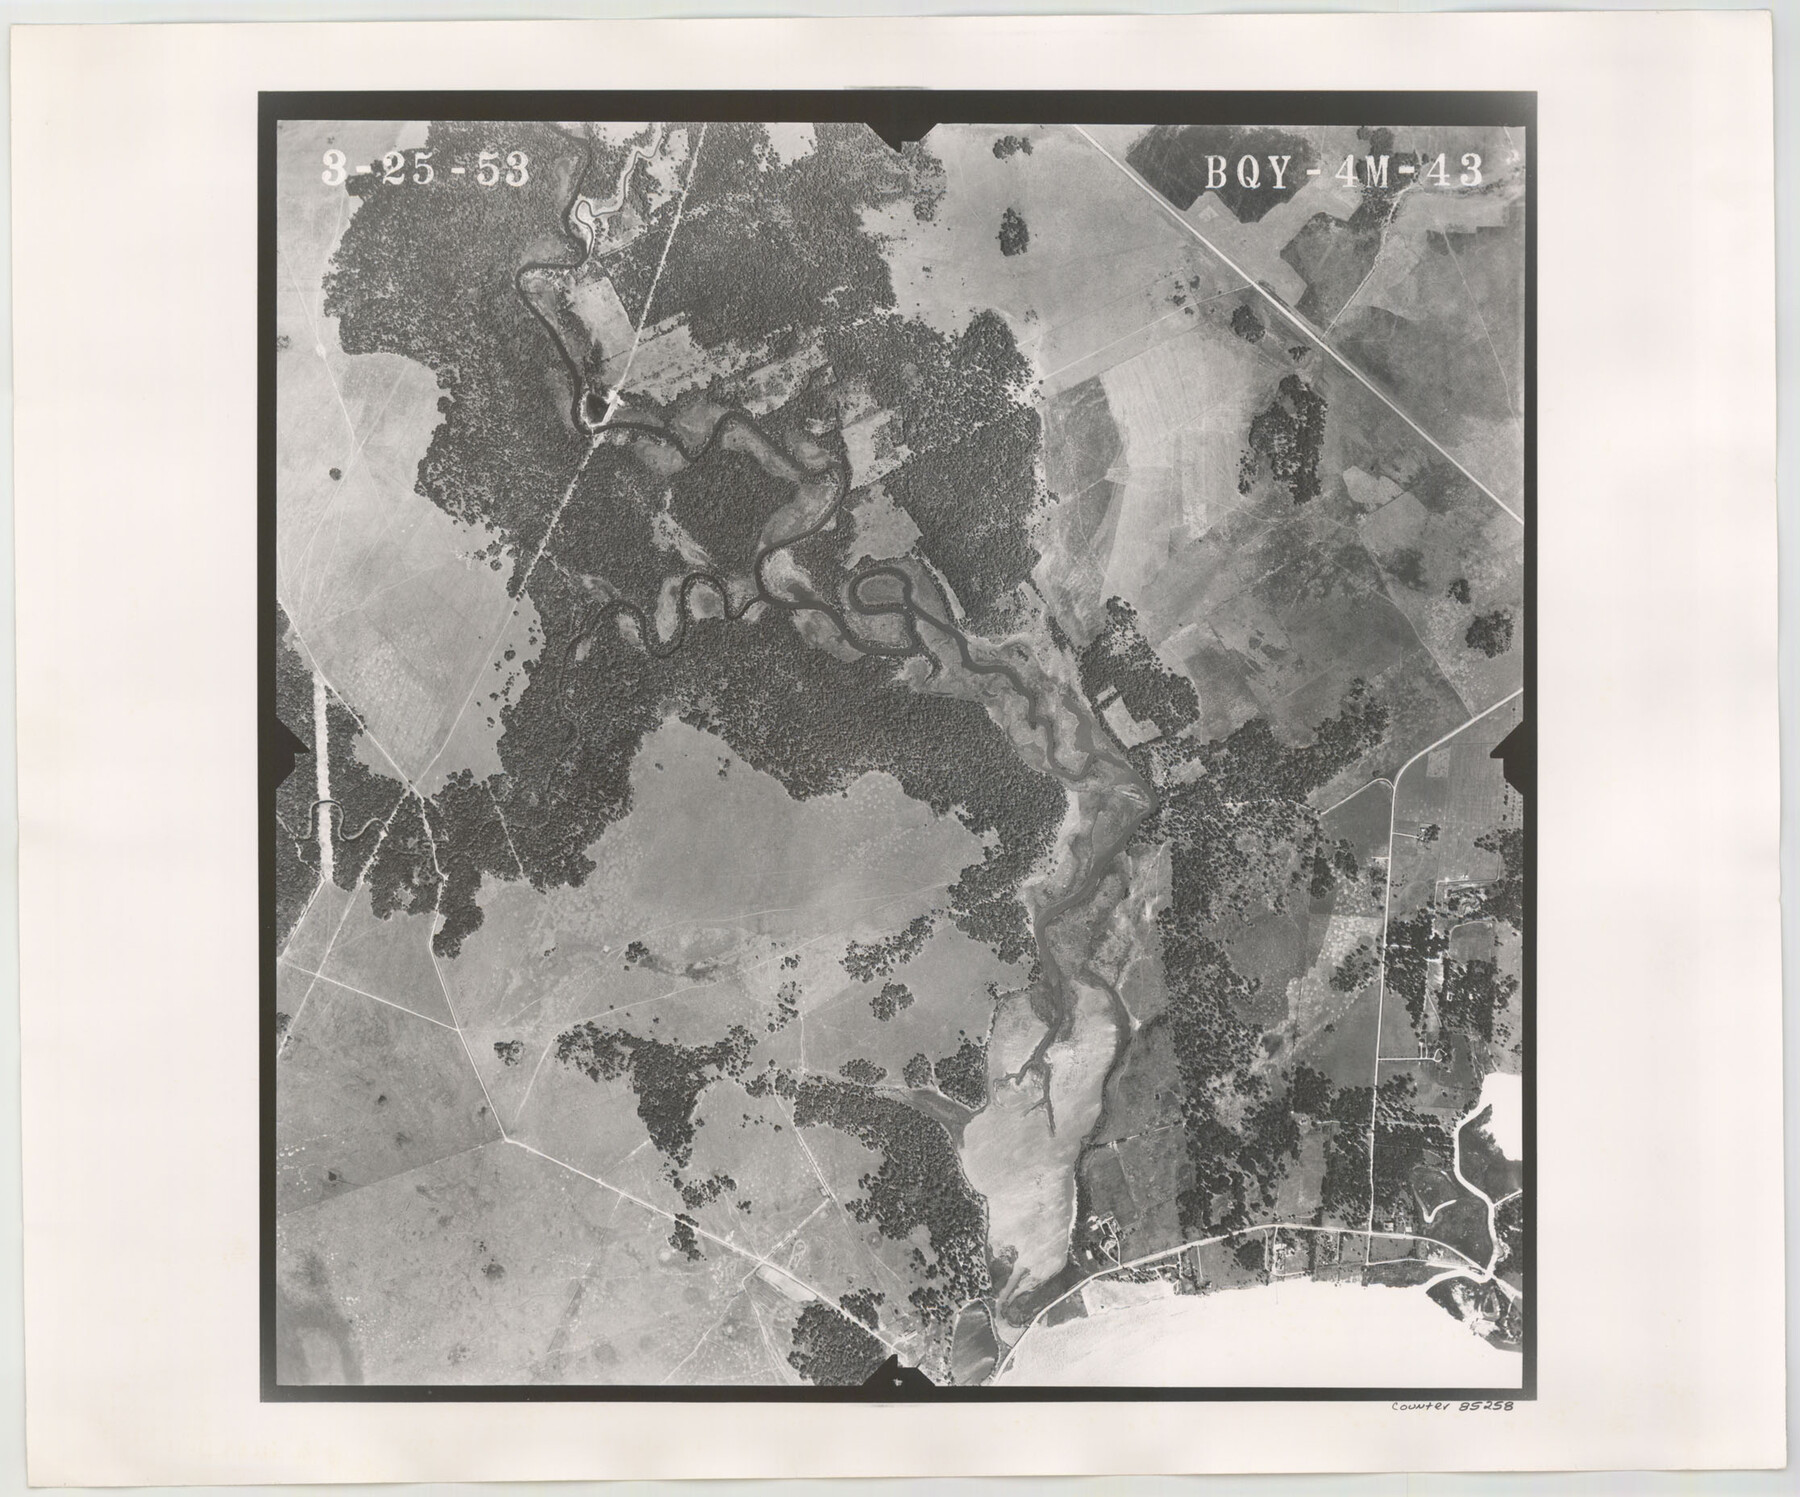 85258, Flight Mission No. BQY-4M, Frame 43, Harris County, General Map Collection